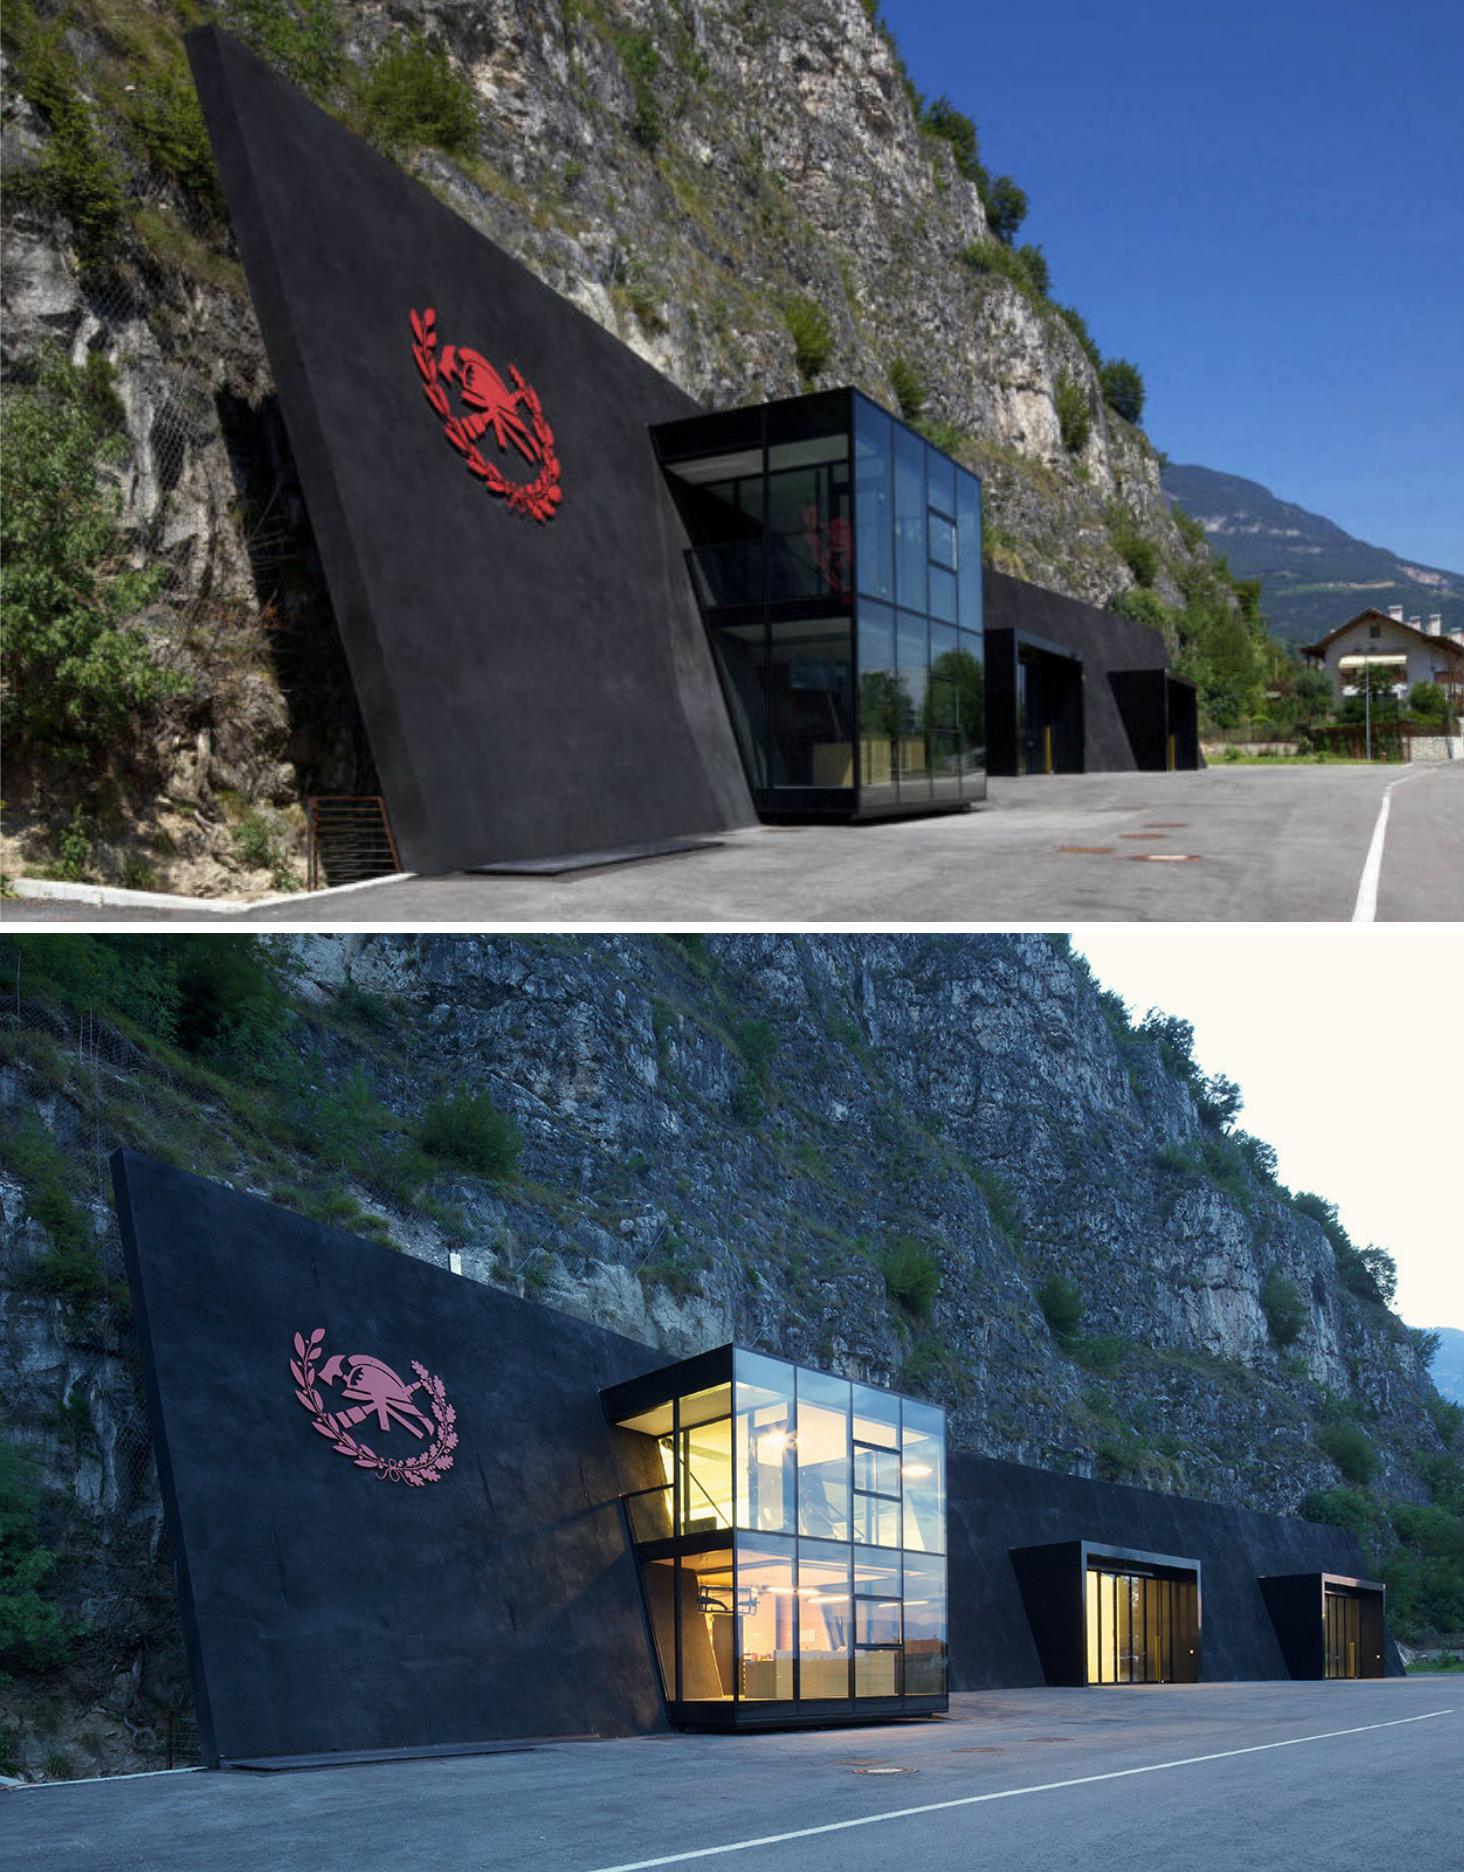 Fire station in Italy looks like an evil lair.